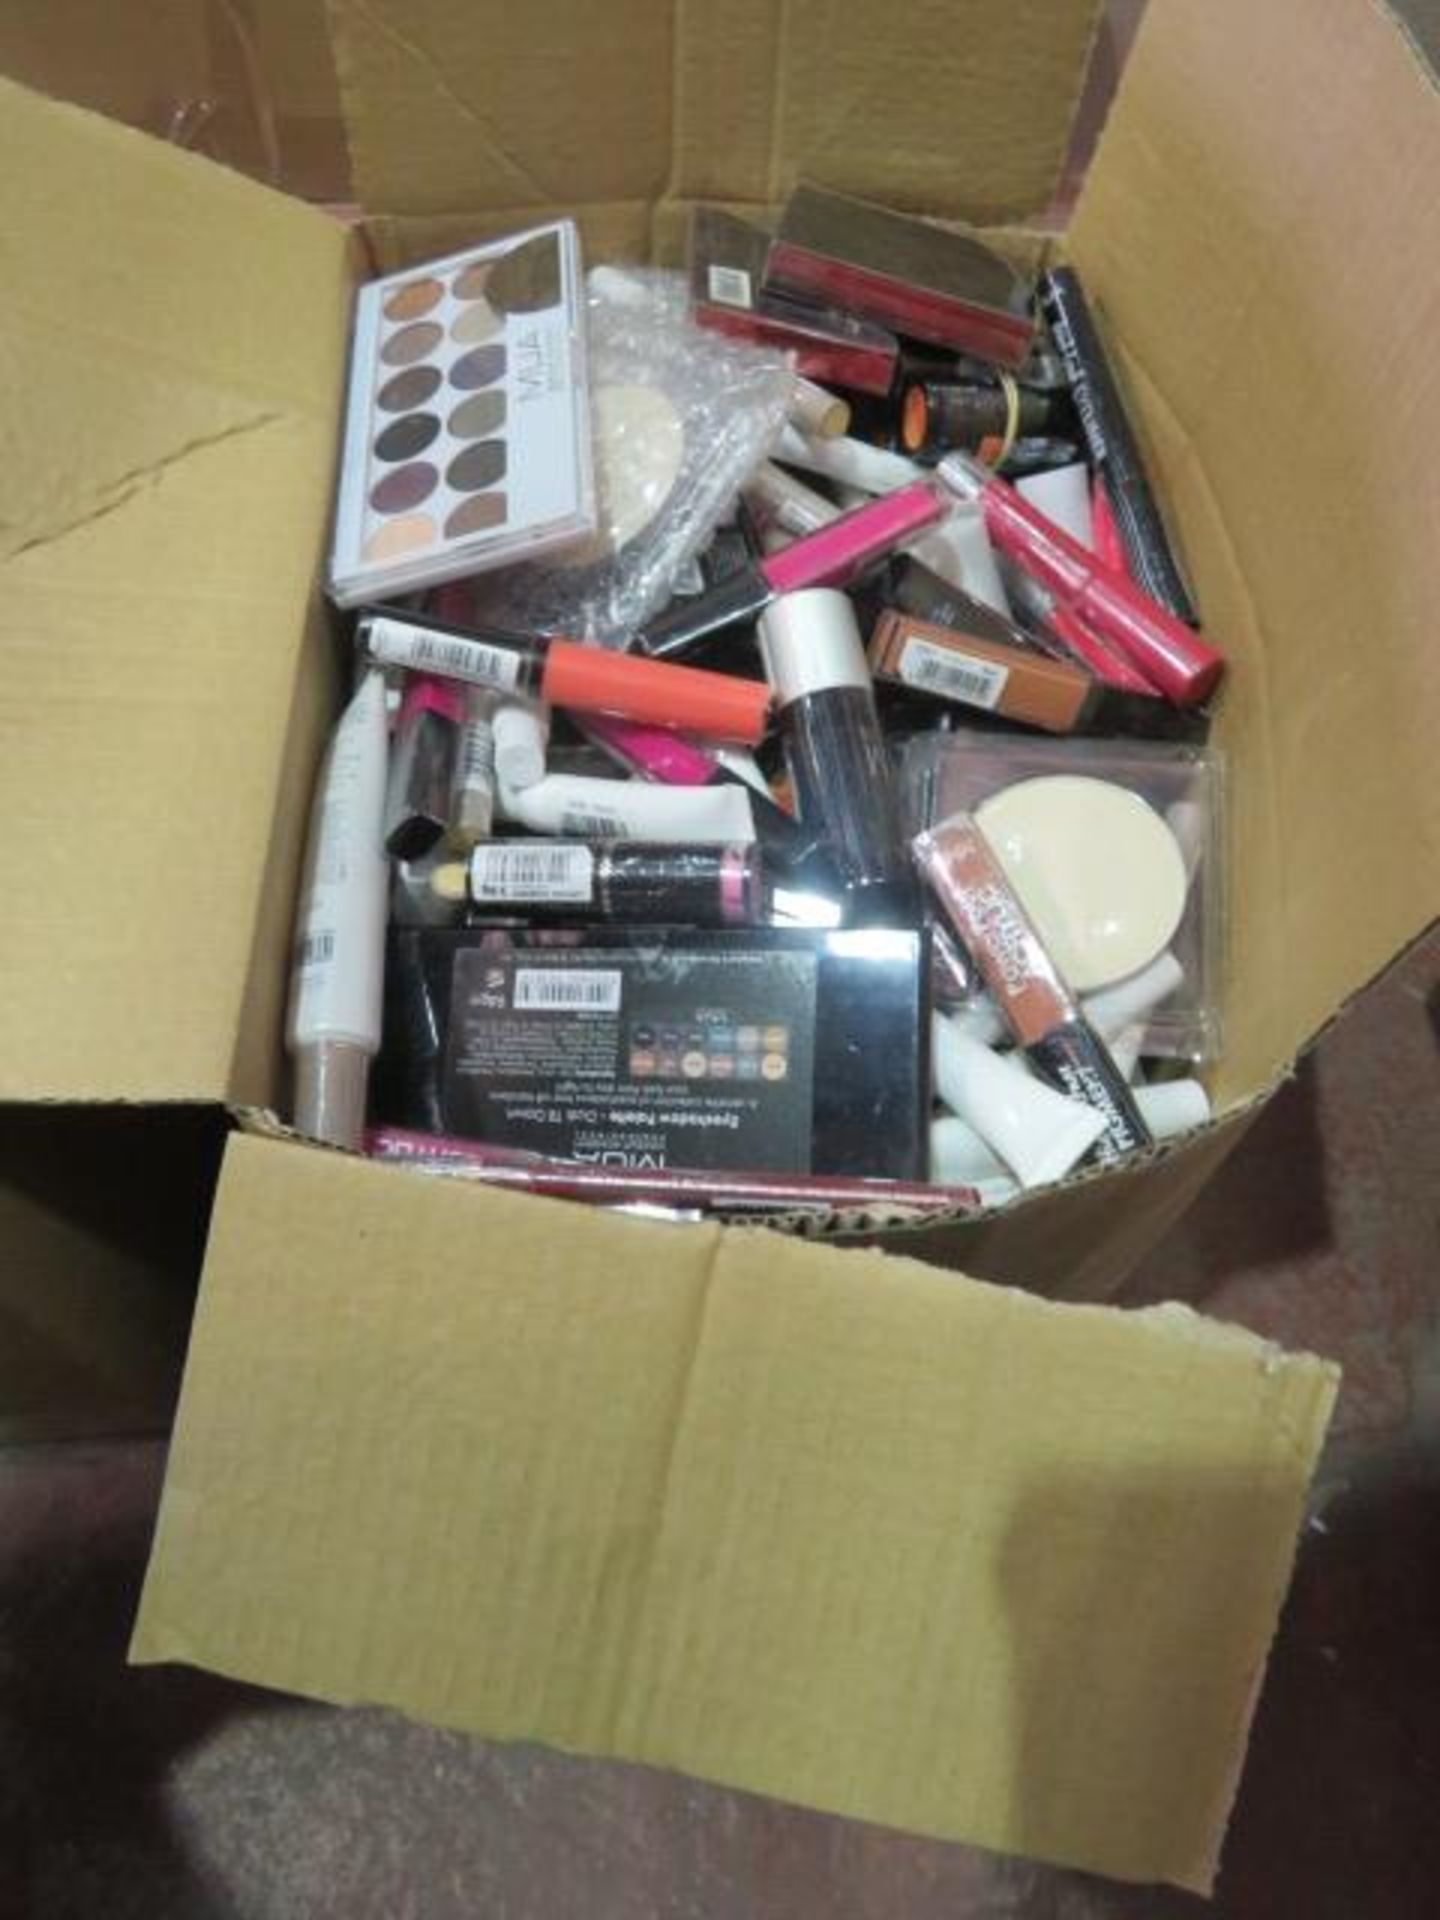 Circa. 200 items of various new make up acadamy make up to include: prism holographic stick, ey... - Image 2 of 2